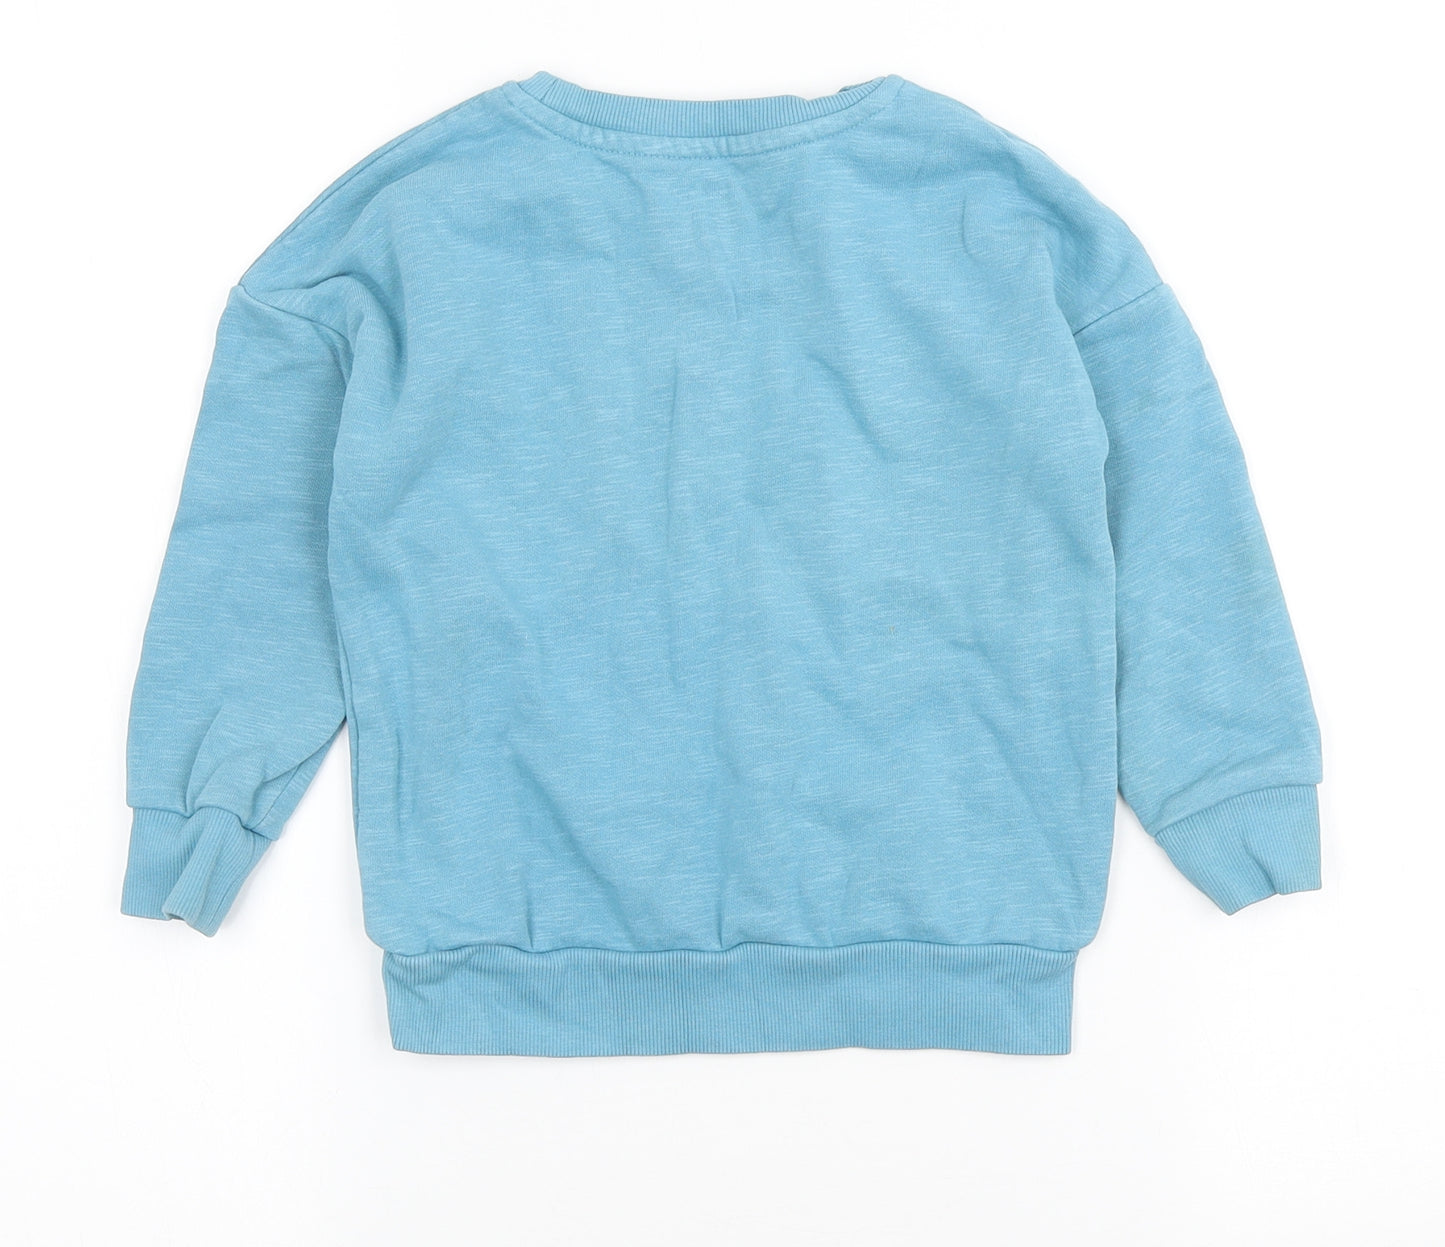 George Boys Blue Crew Neck Cotton Pullover Jumper Size 2-3 Years